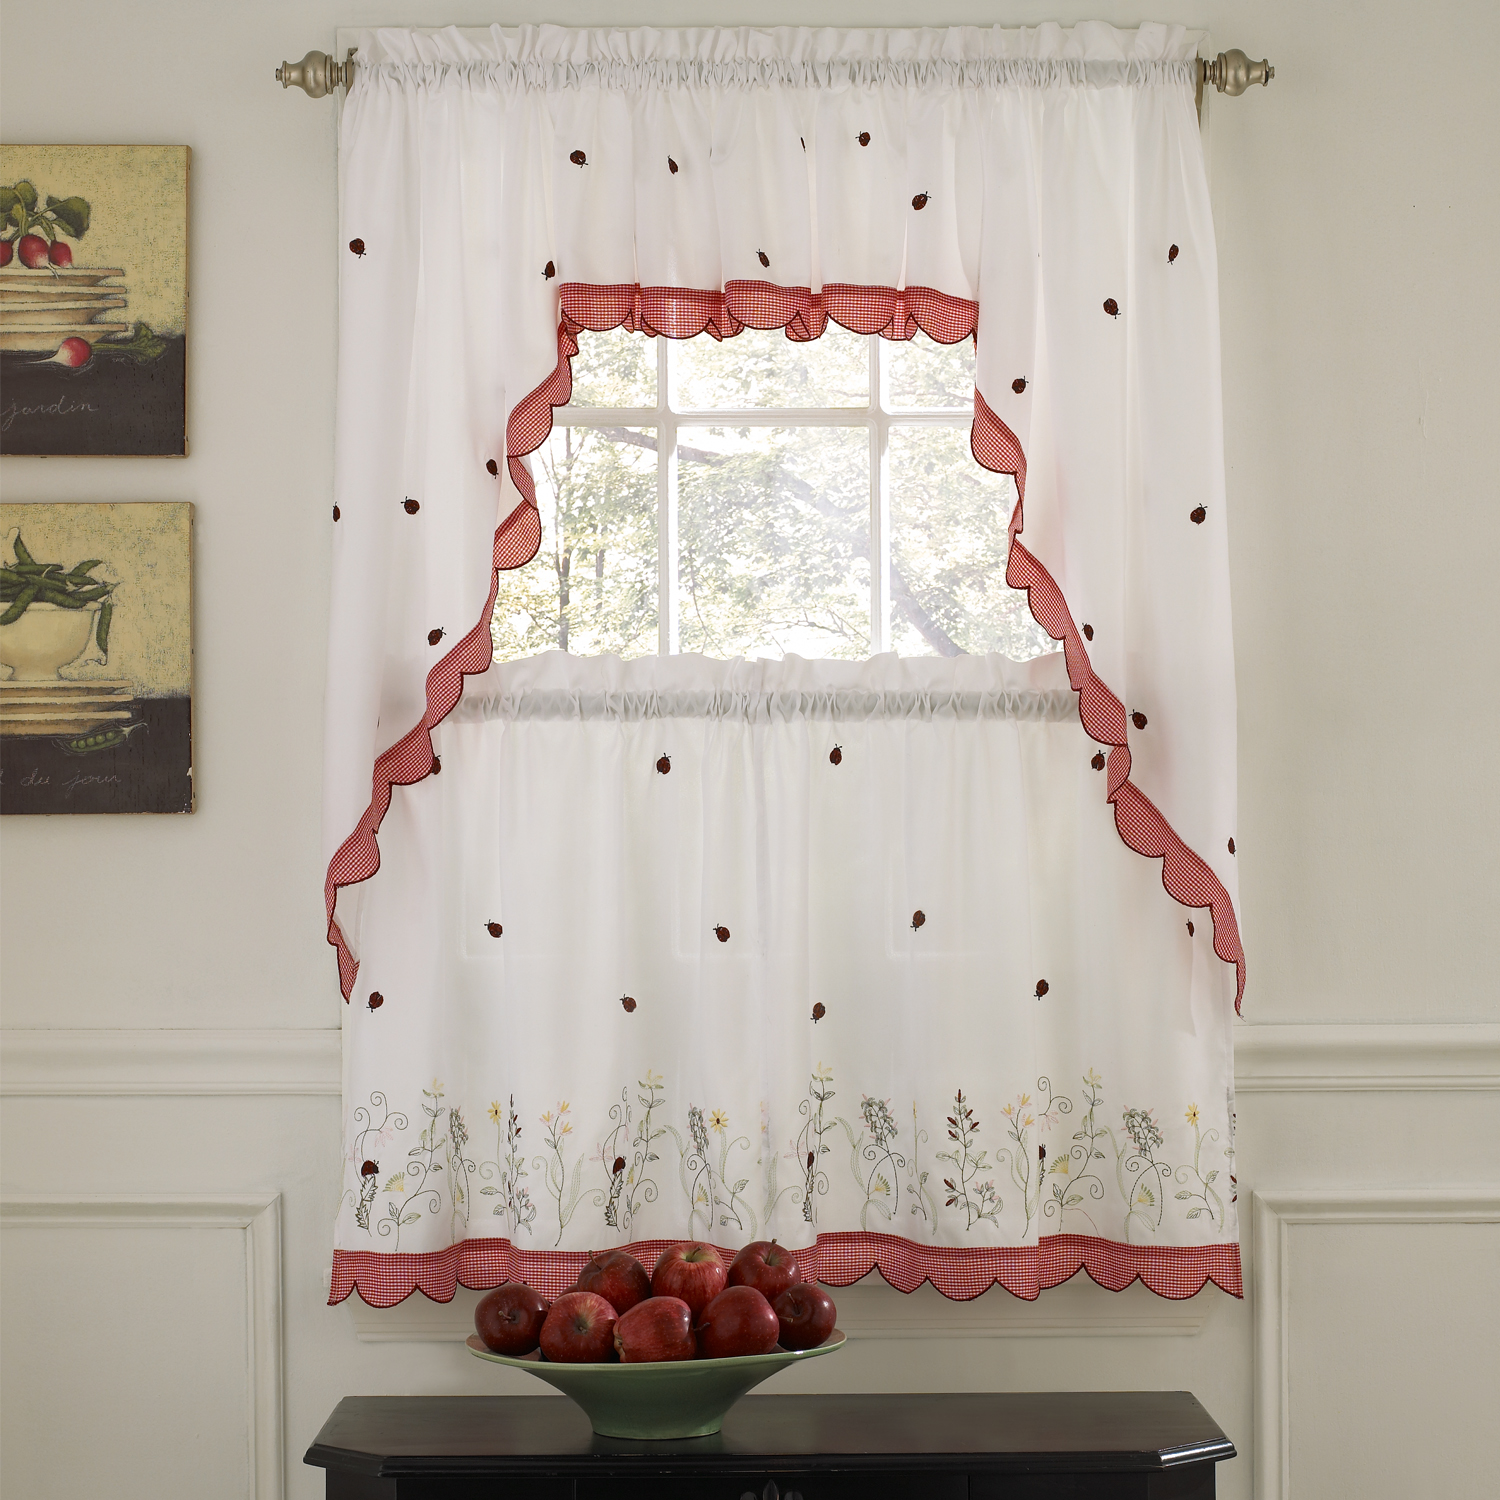 Embroidered Ladybug Meadow Kitchen Curtains Choice Of Tiers Or Valance Or Swags Ebay